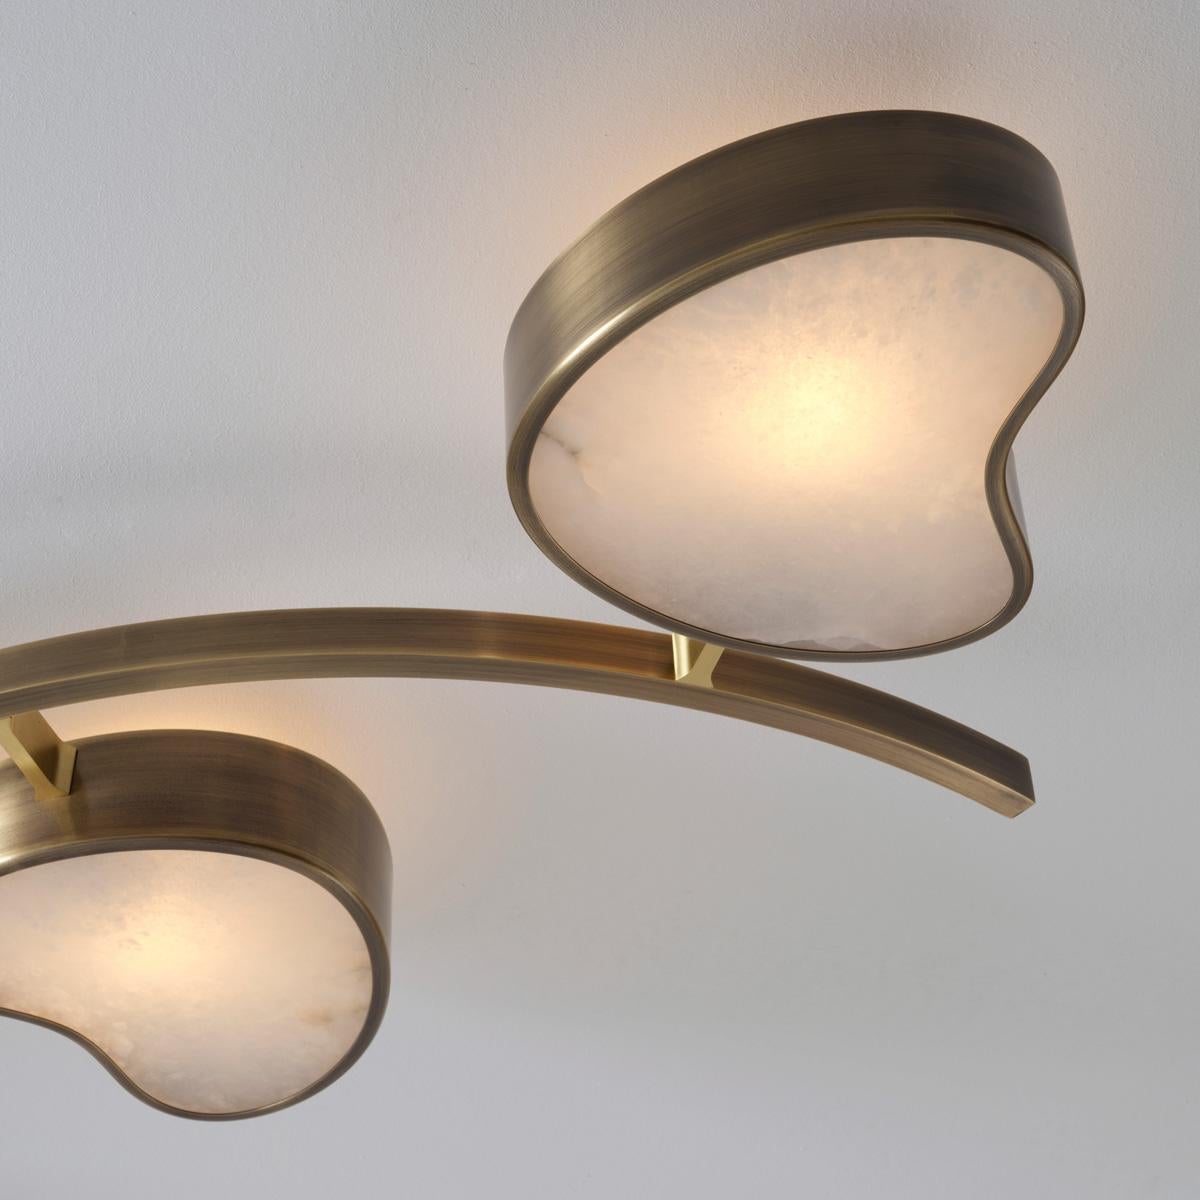 Cuore N.6 Ceiling Light by Gaspare Asaro. Bronze and Satin Brass Finish For Sale 7